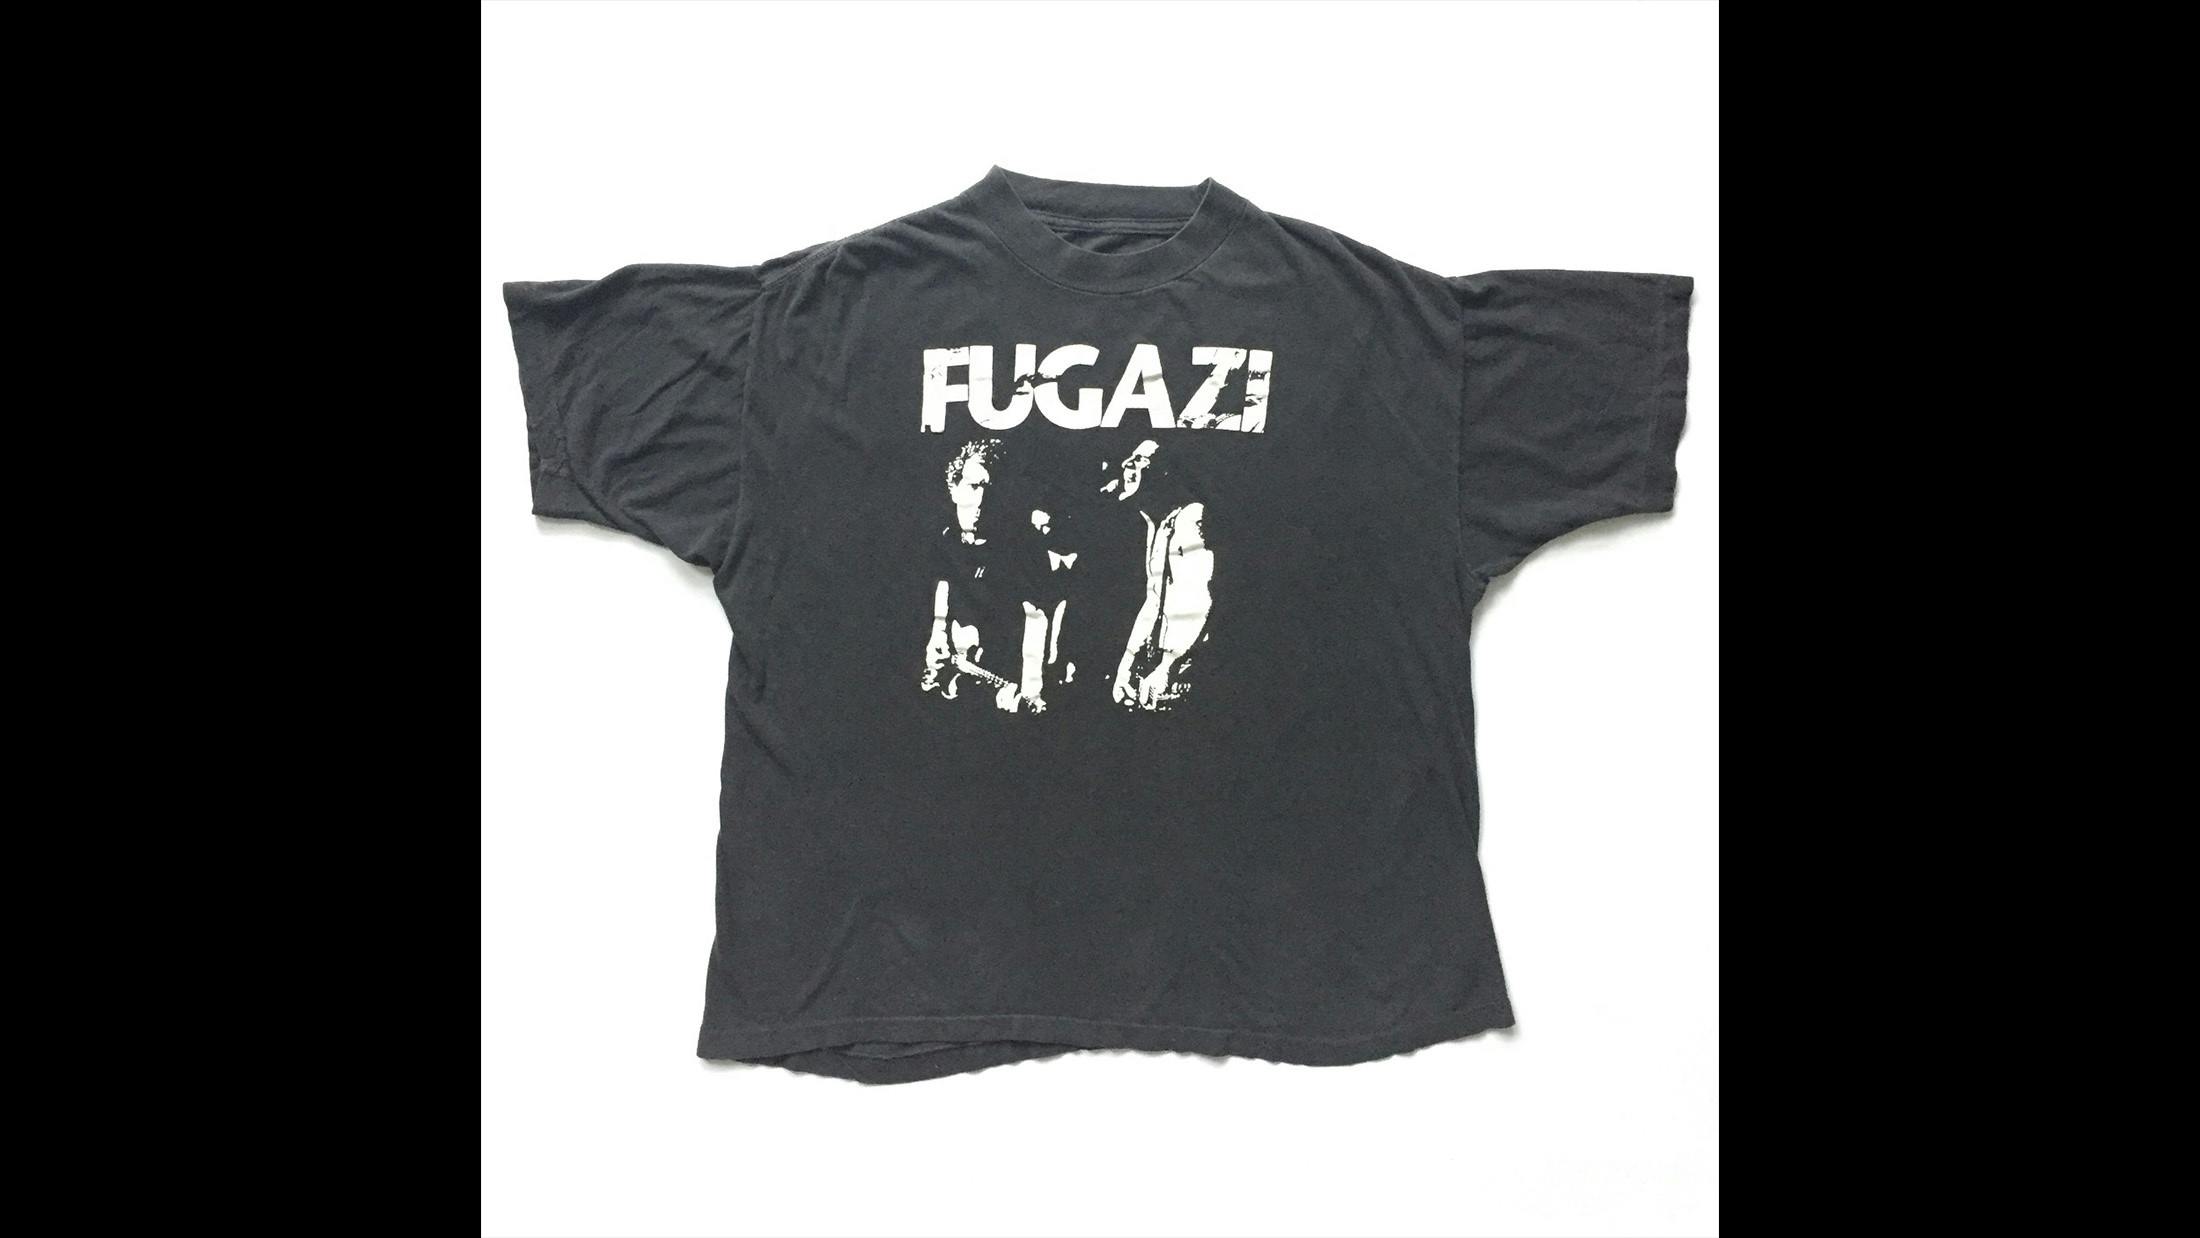 Fugazi Repeater bootleg shirt from 90/91, the band never made any official merch.